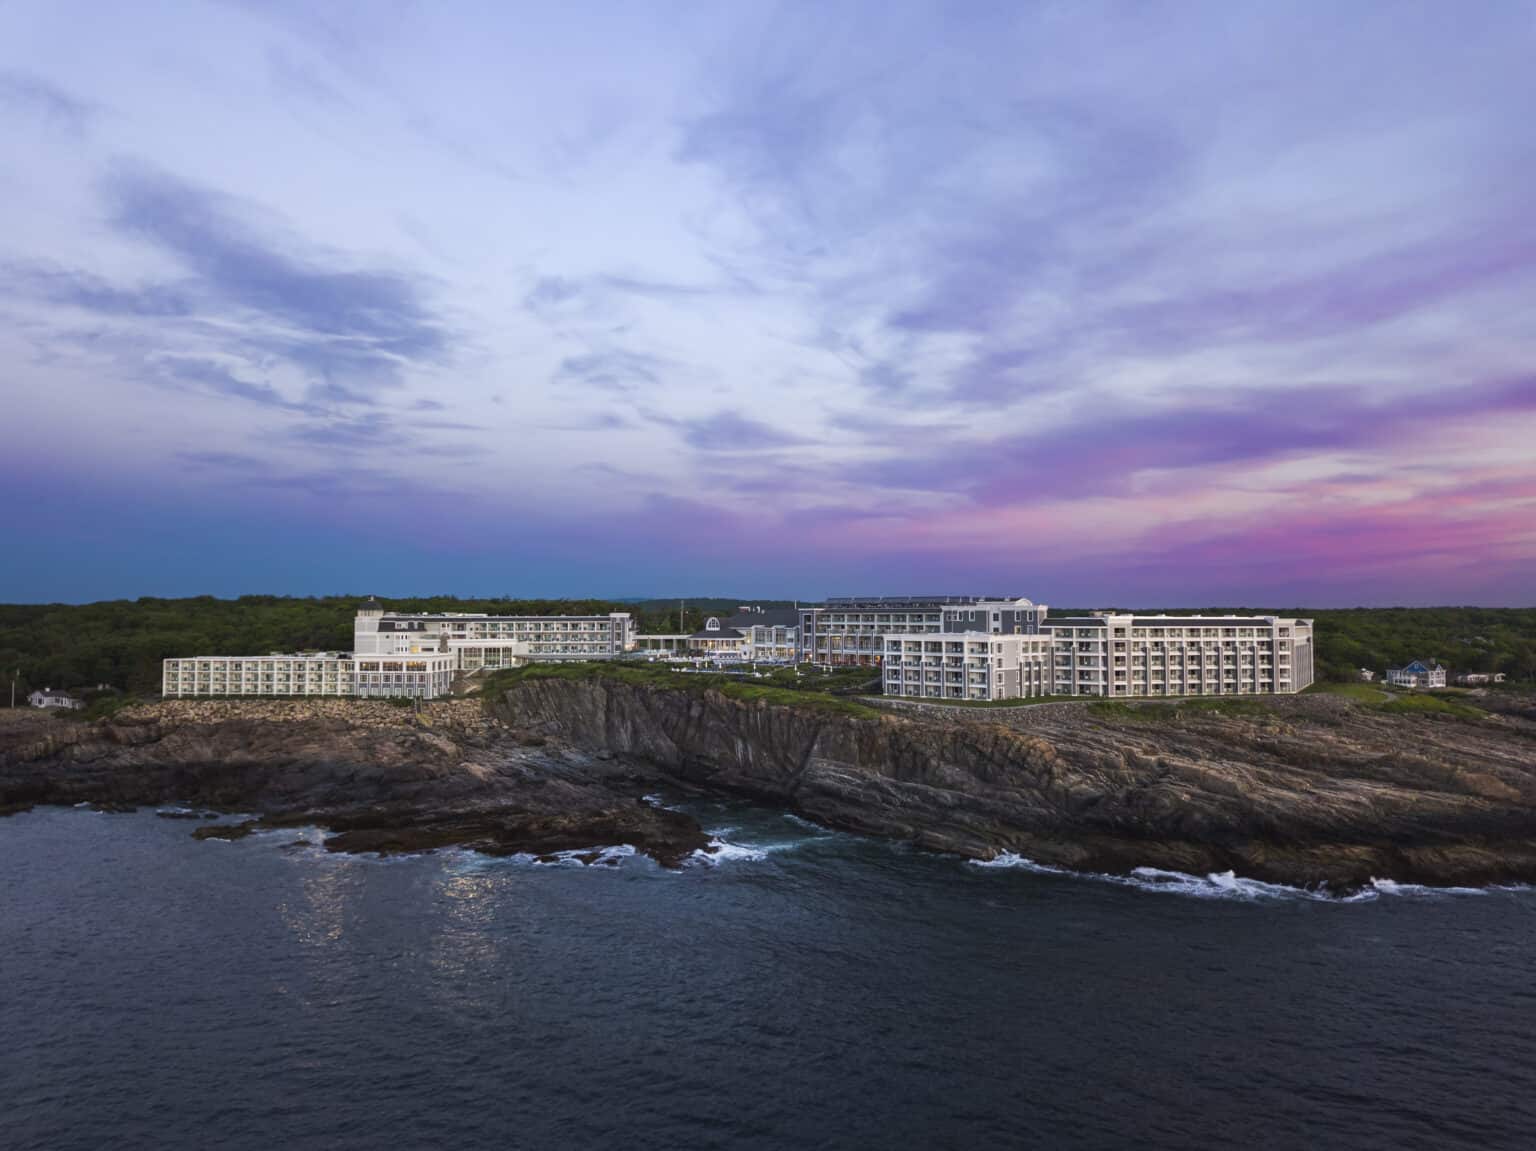 Sprawling white Cliff House resort perched dramatically on a cliff with the ocean below and a purple and pink sunset over head